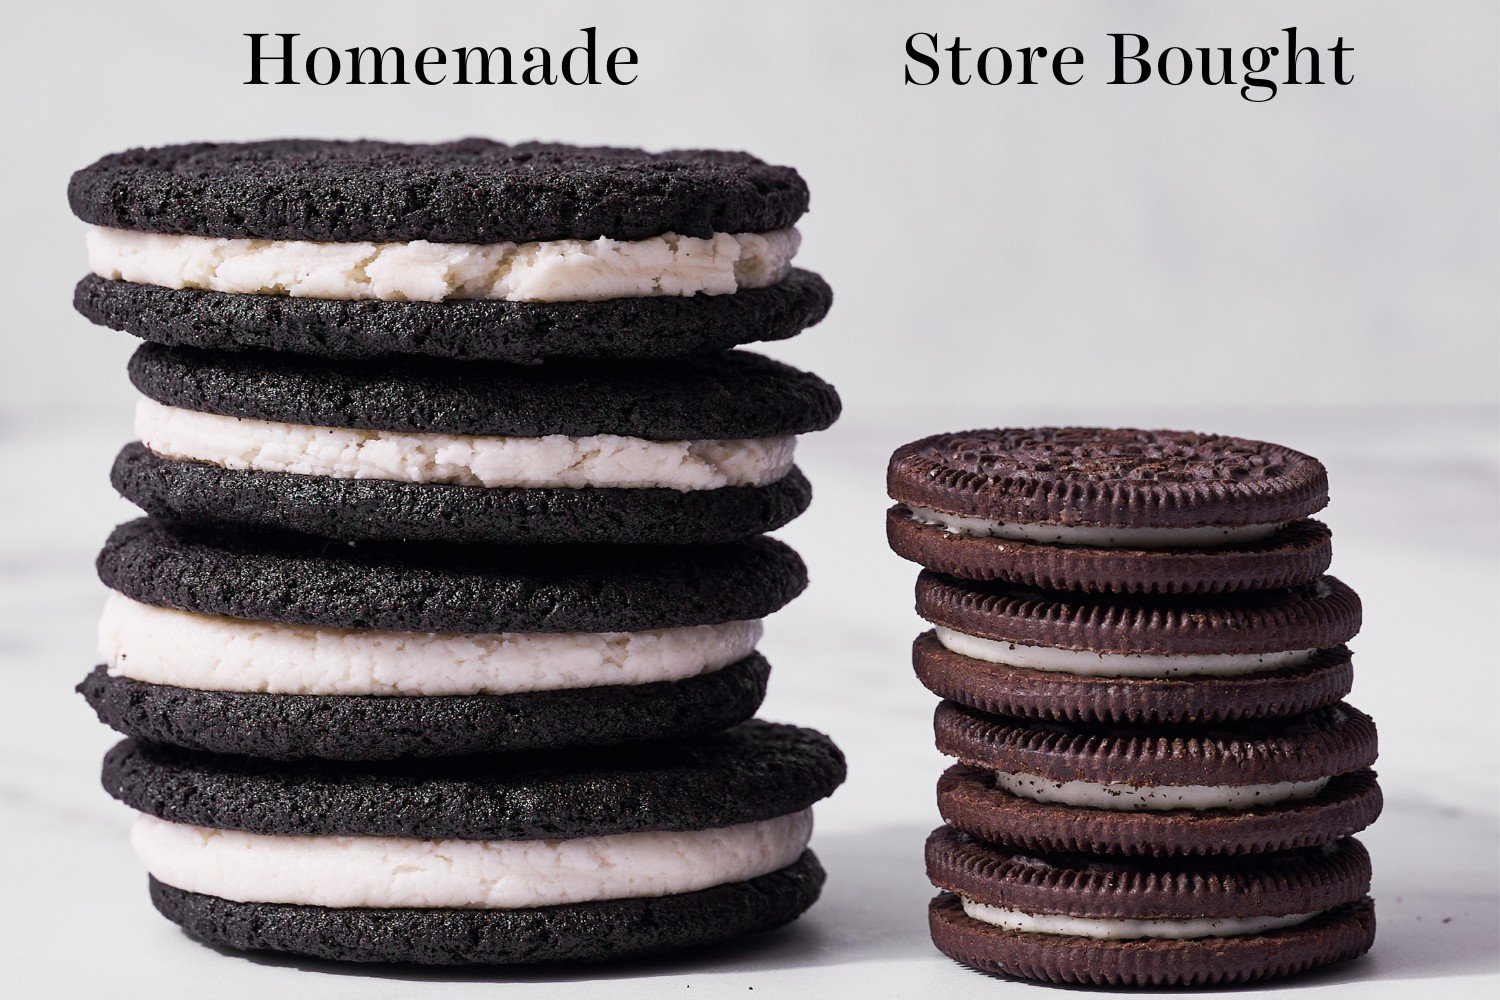 a stack of homemade Oreos next to a stack of store bought Oreos, which are much smaller and have less filling.